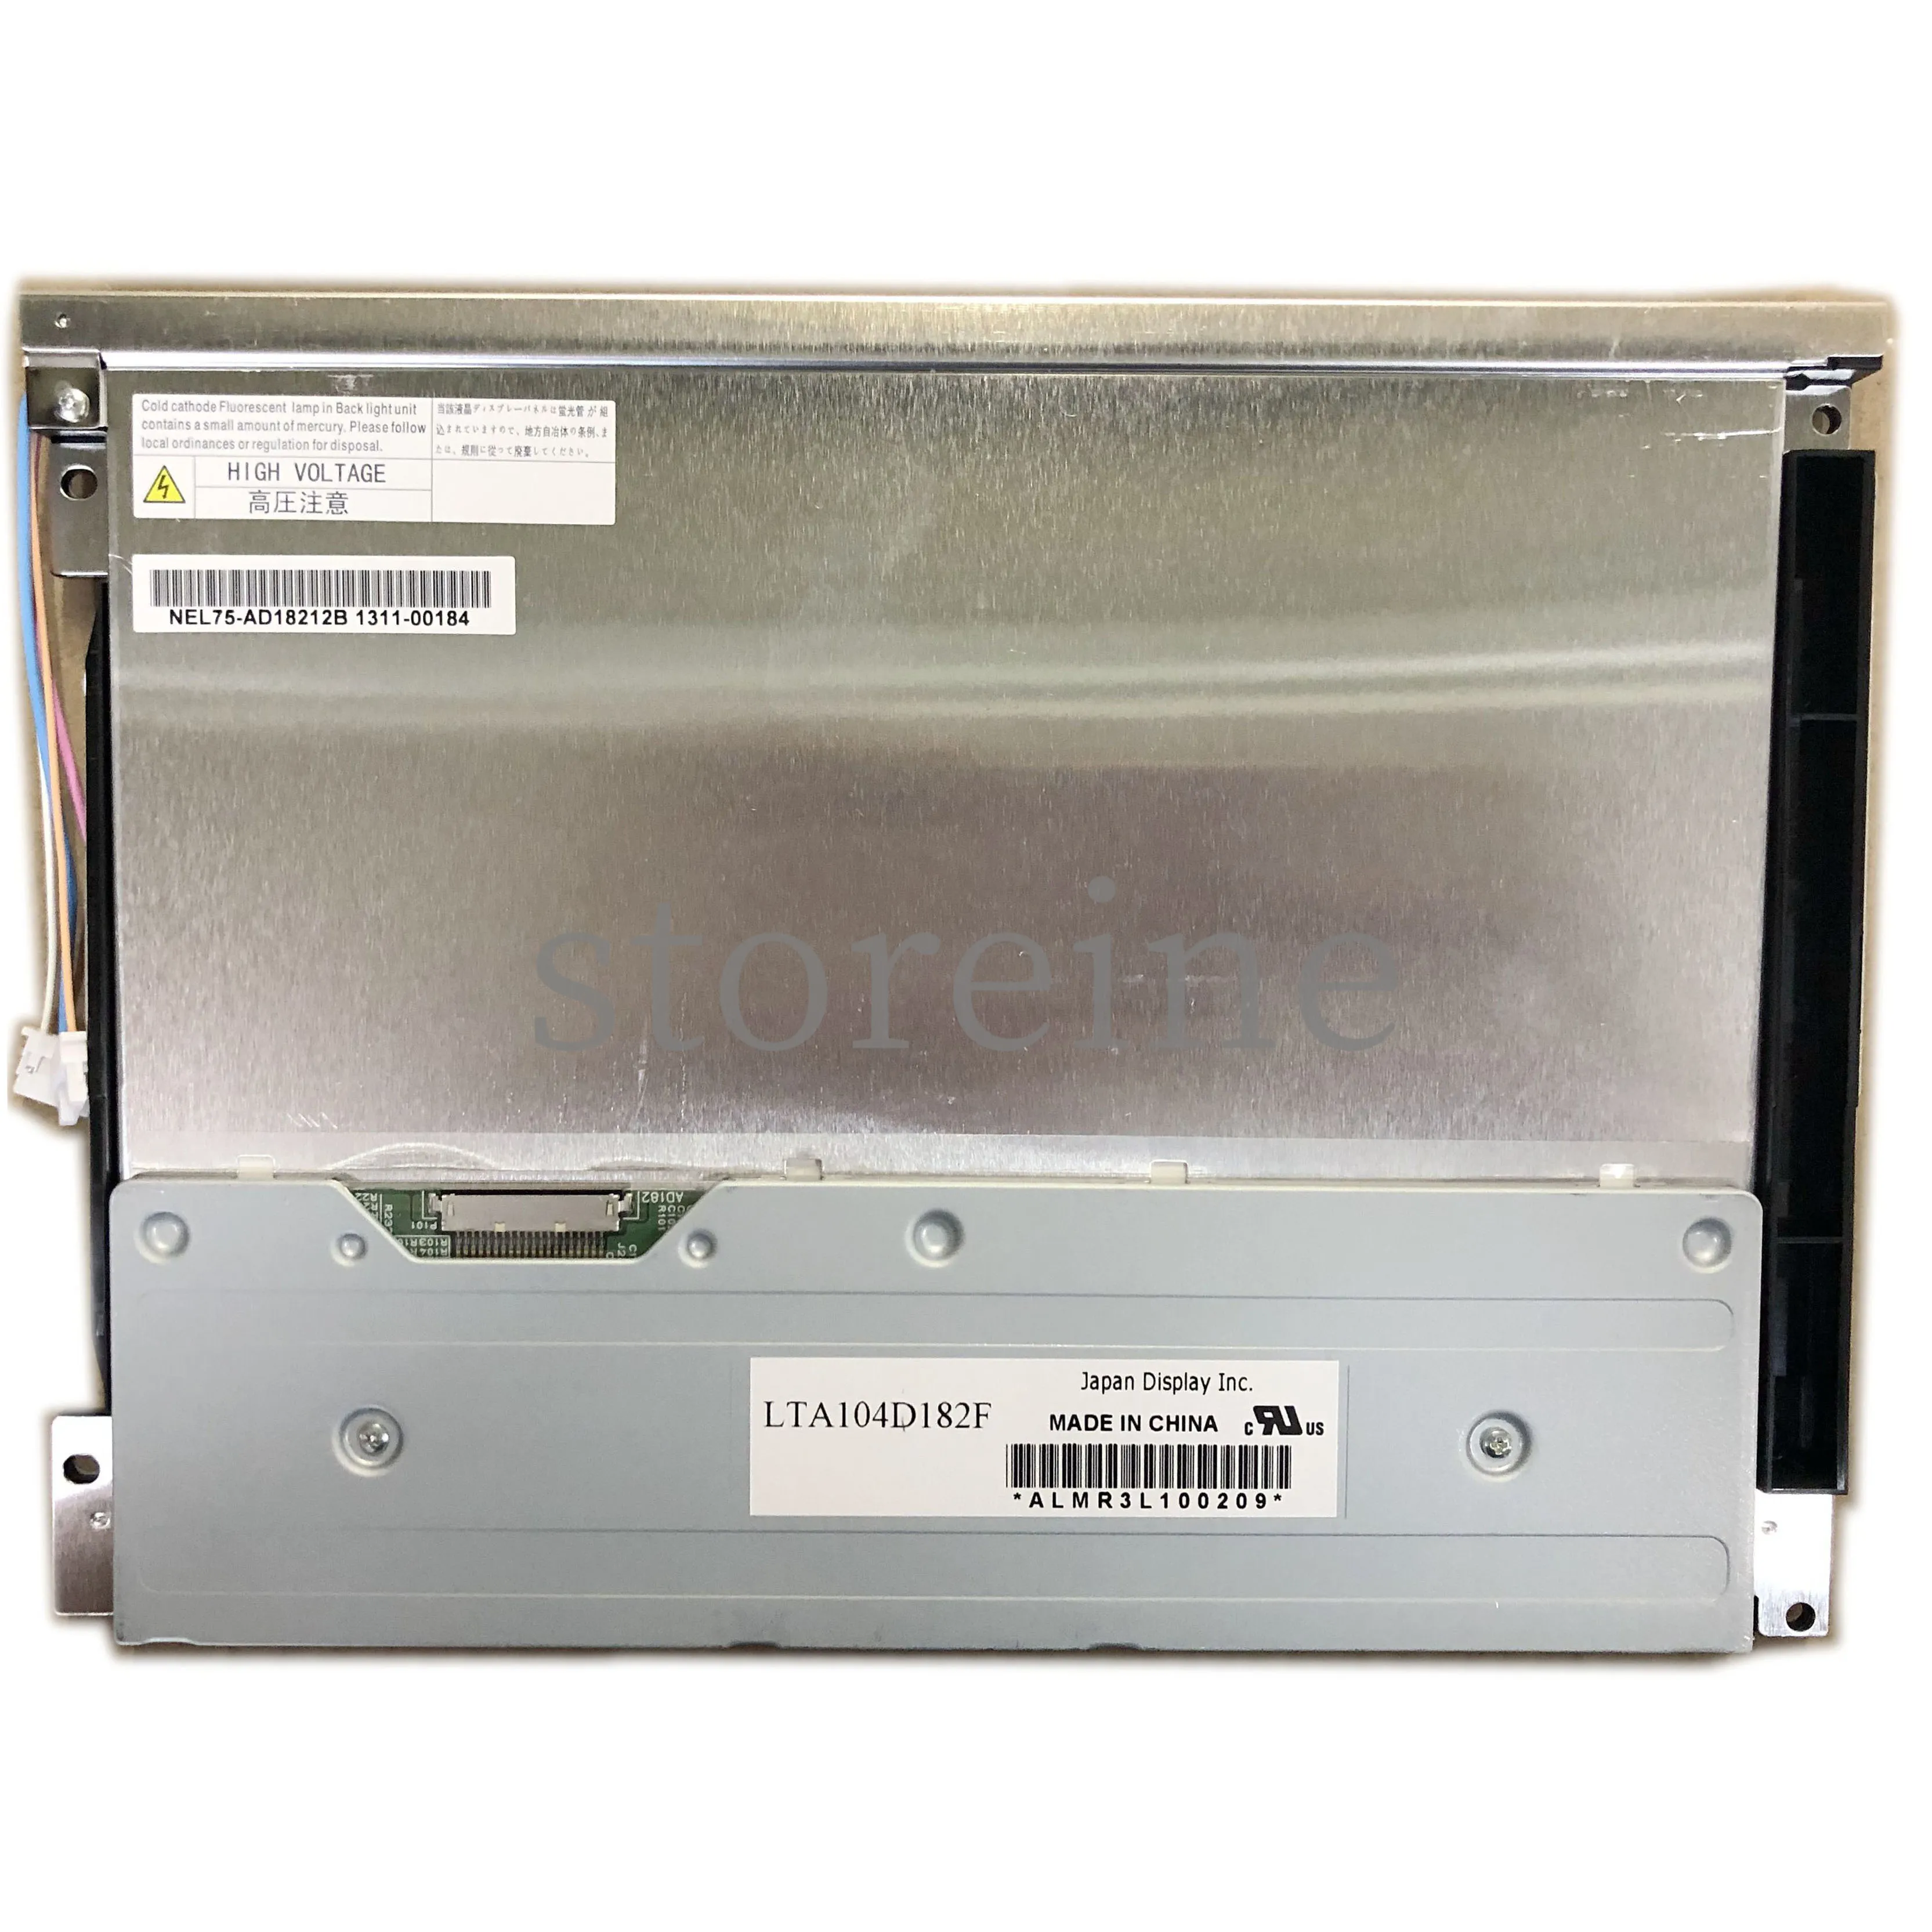 LTA104D182F Original quality 10.4 inch TFT 800 600 LCD Display Pannel for Industrial Application